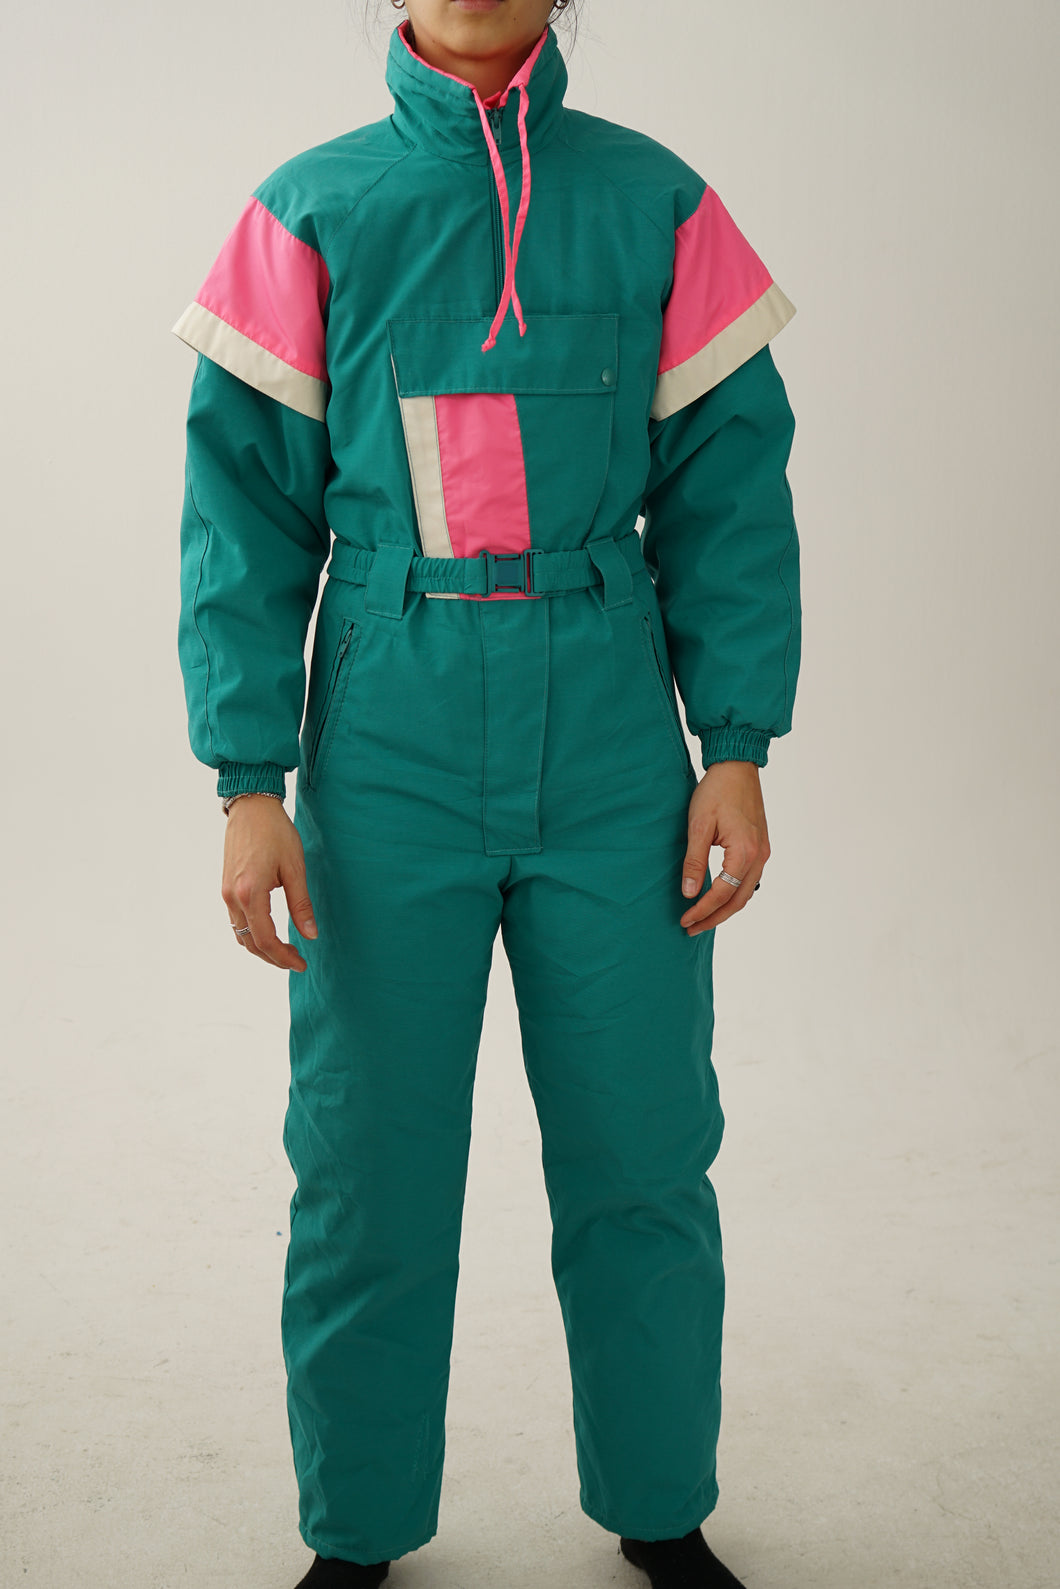 Vintage one piece Lamartine ski suit, green and pink snow suit size 6